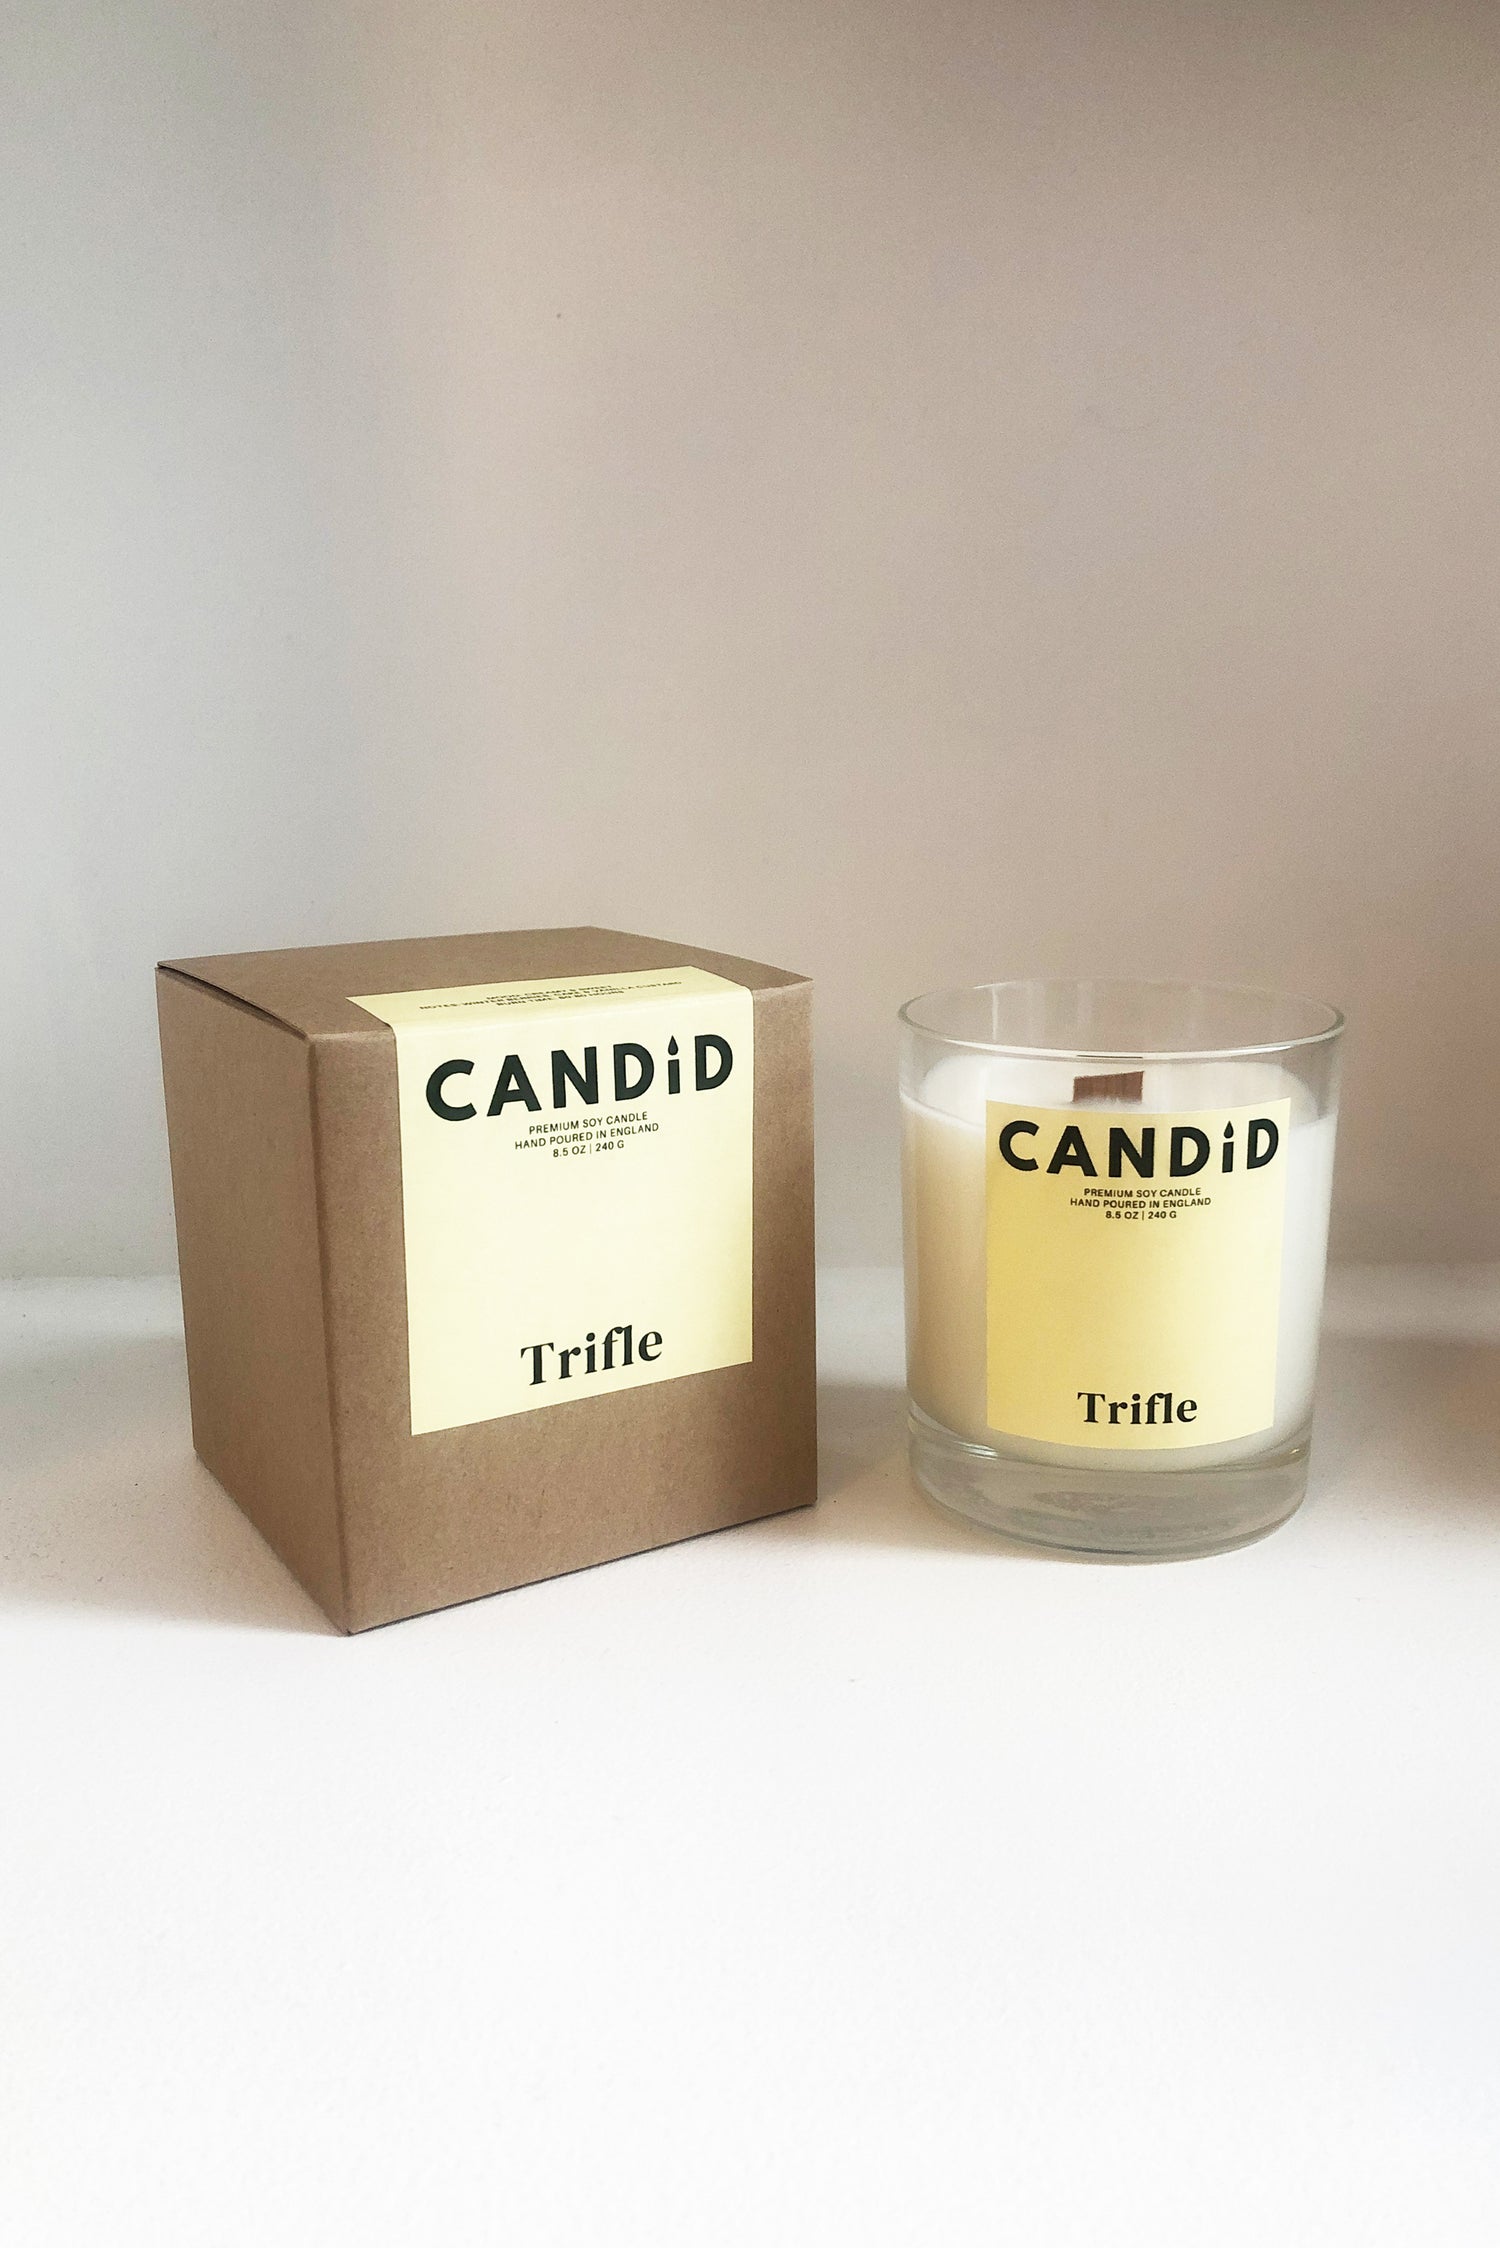 No Wallflower Project Trifle Wood Wick Jar Candle by Candid